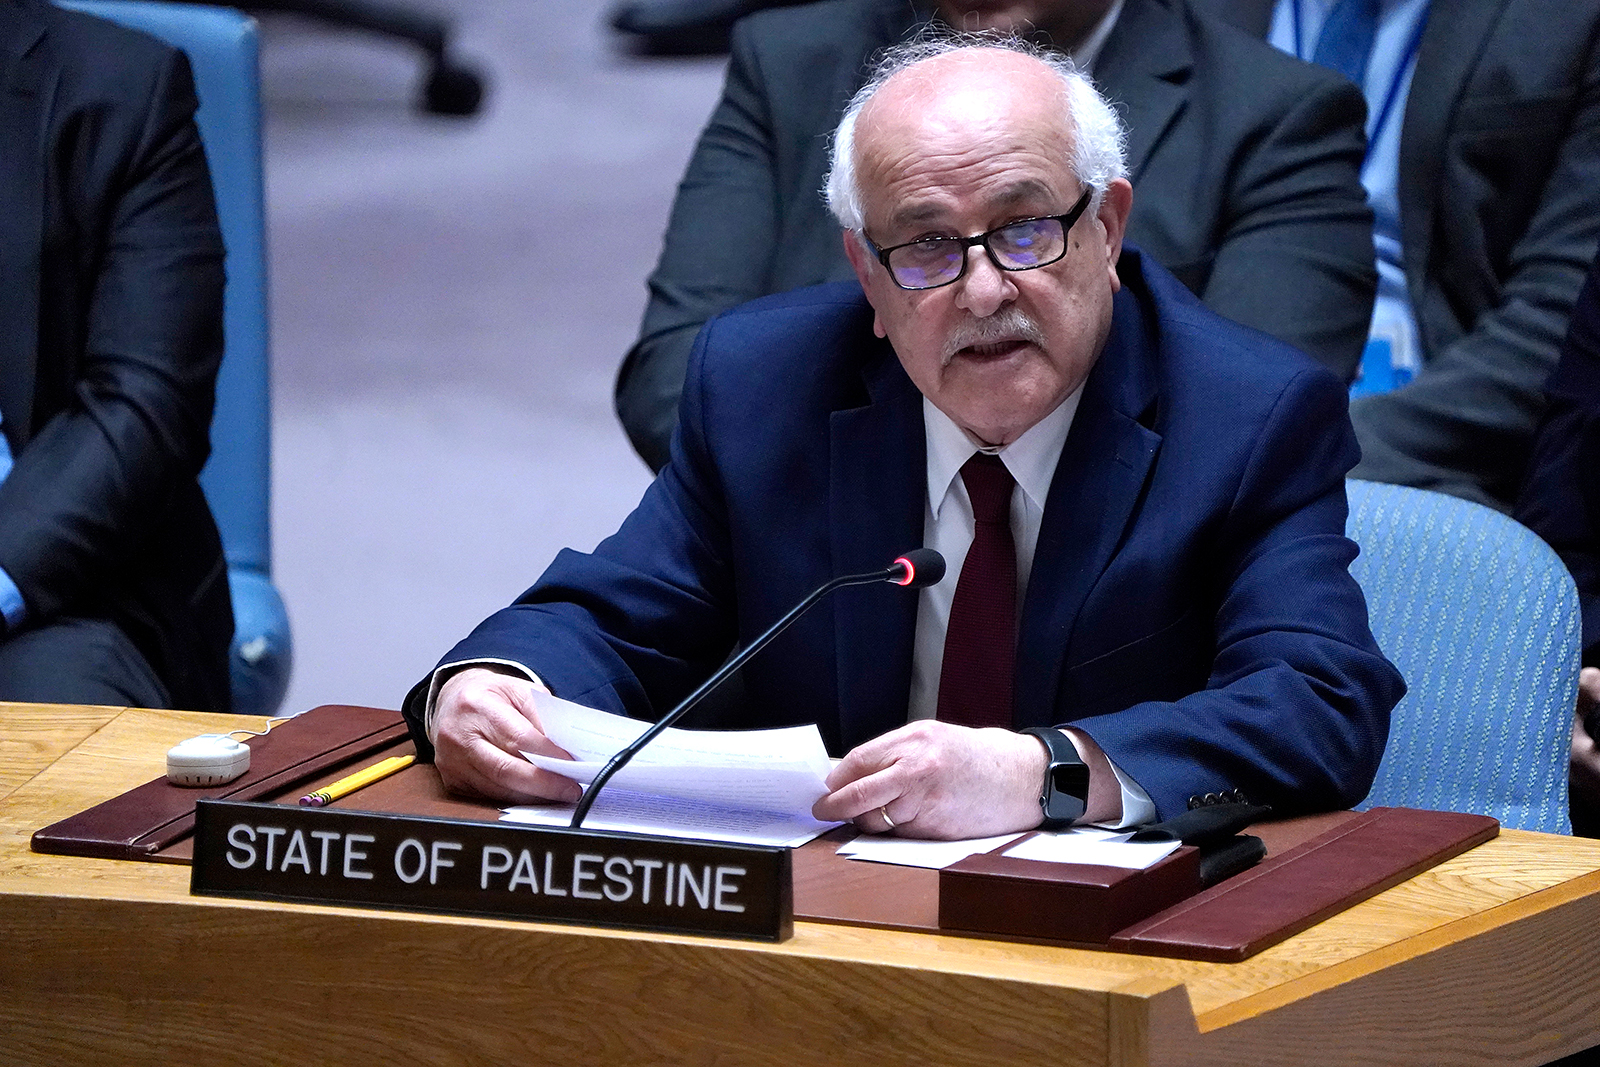 Riyad Mansour speaks during a Security Council meeting at United Nations Headquarters on March 11, in New York City.